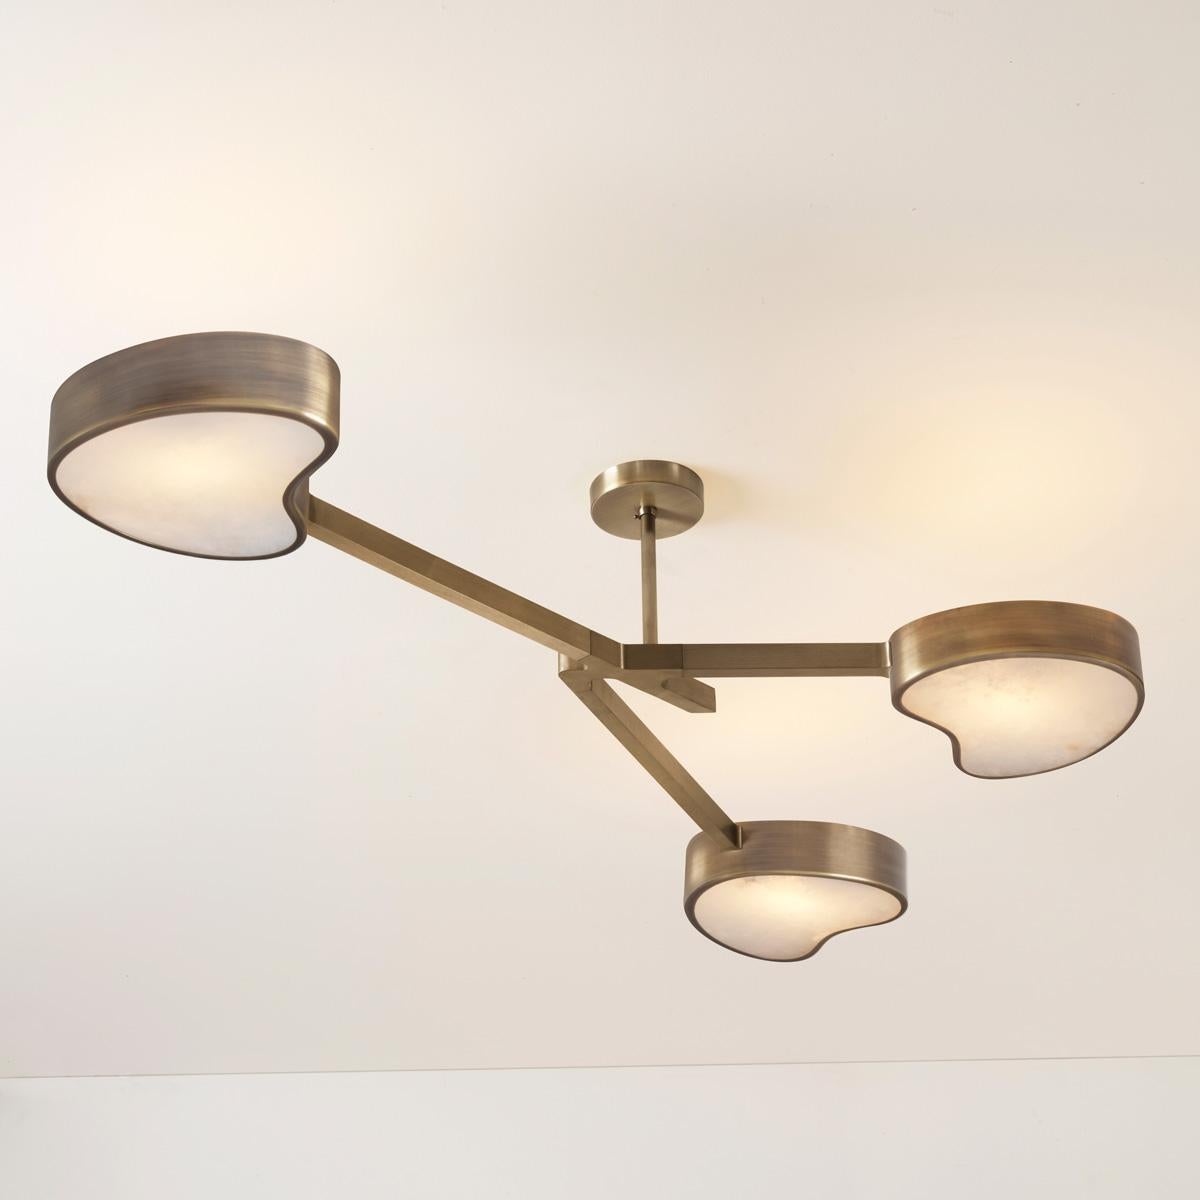 Cuore N.3 Ceiling Light by Gaspare Asaro. Polished Brass Finish For Sale 8